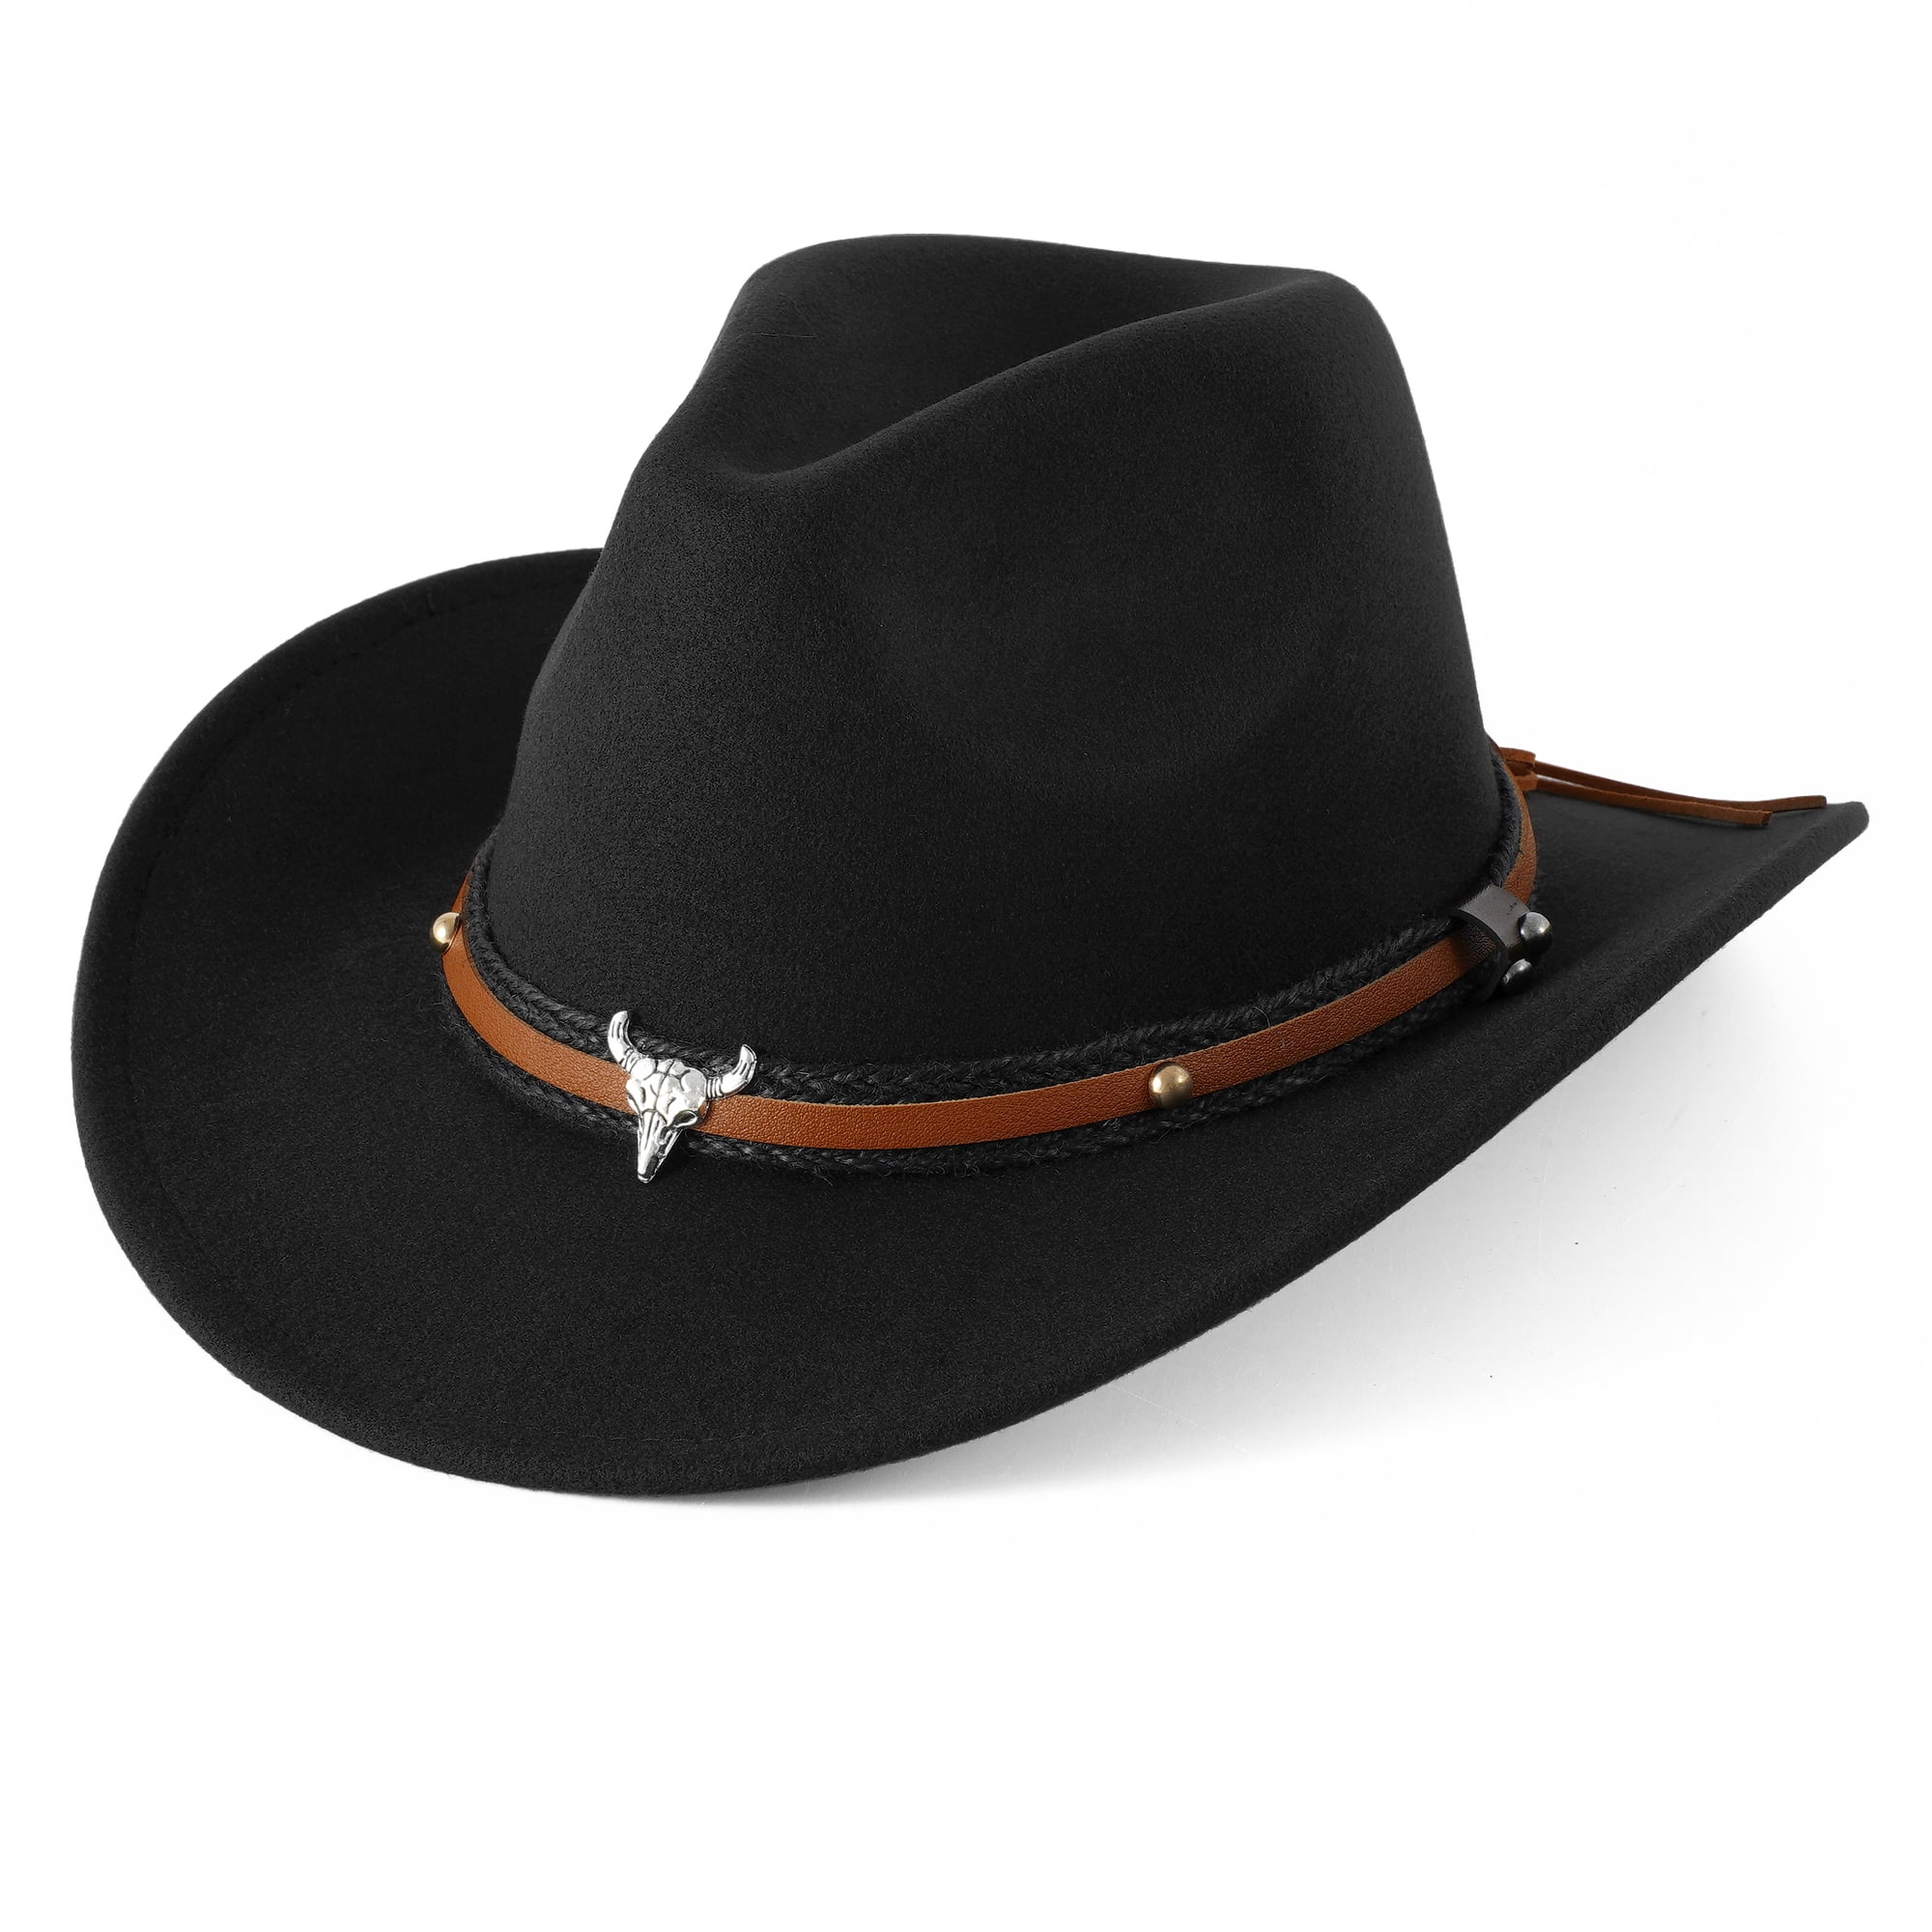 WoWstyle Black Cowboy Hat for Adult Men Women Cowgirl Hat with ...